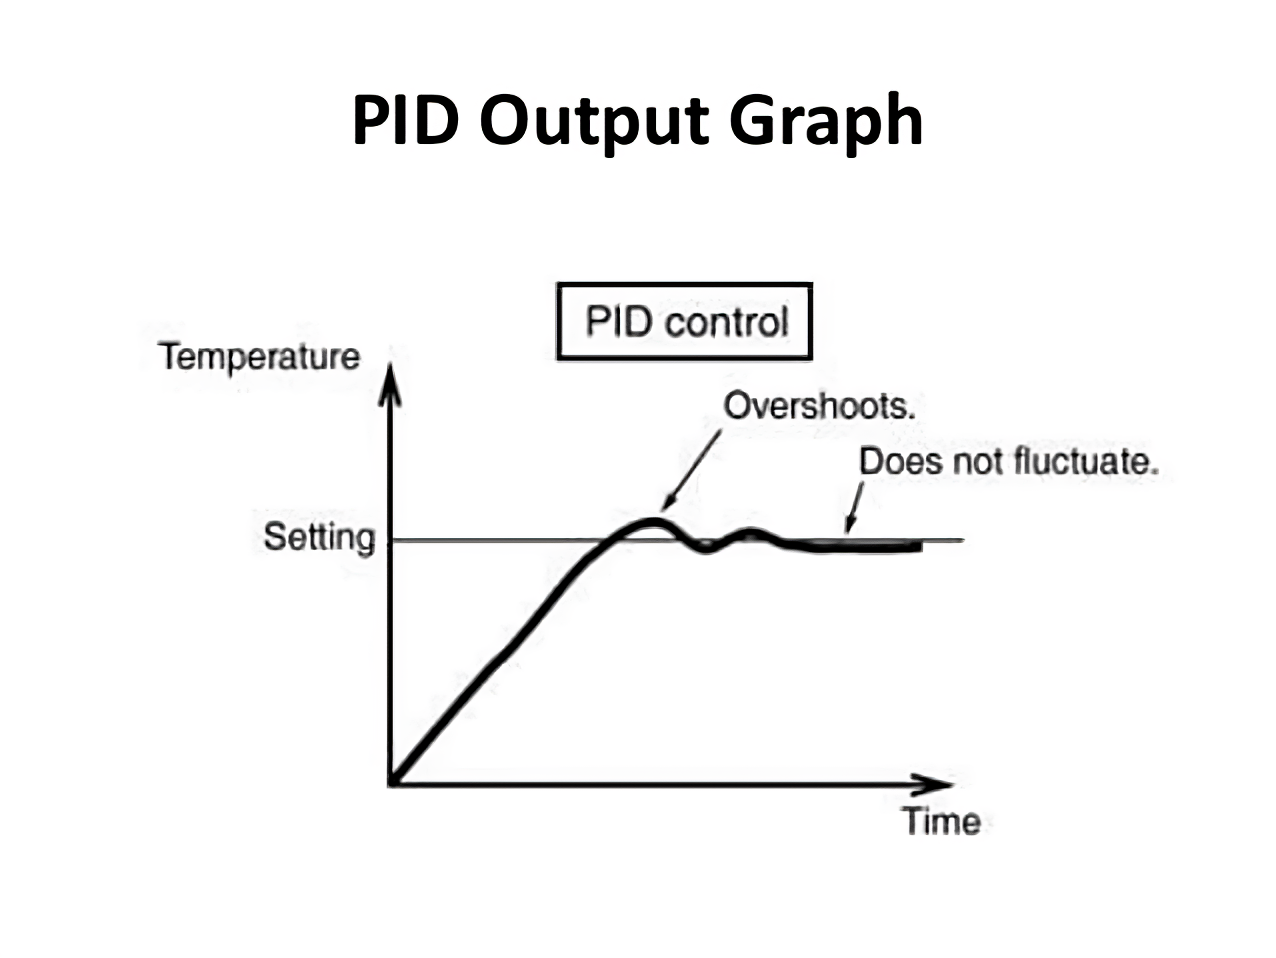 Limit output. Pid регулятор 3д принтер. Pid Control graphic. Pid Controller Tuning. Output Control.